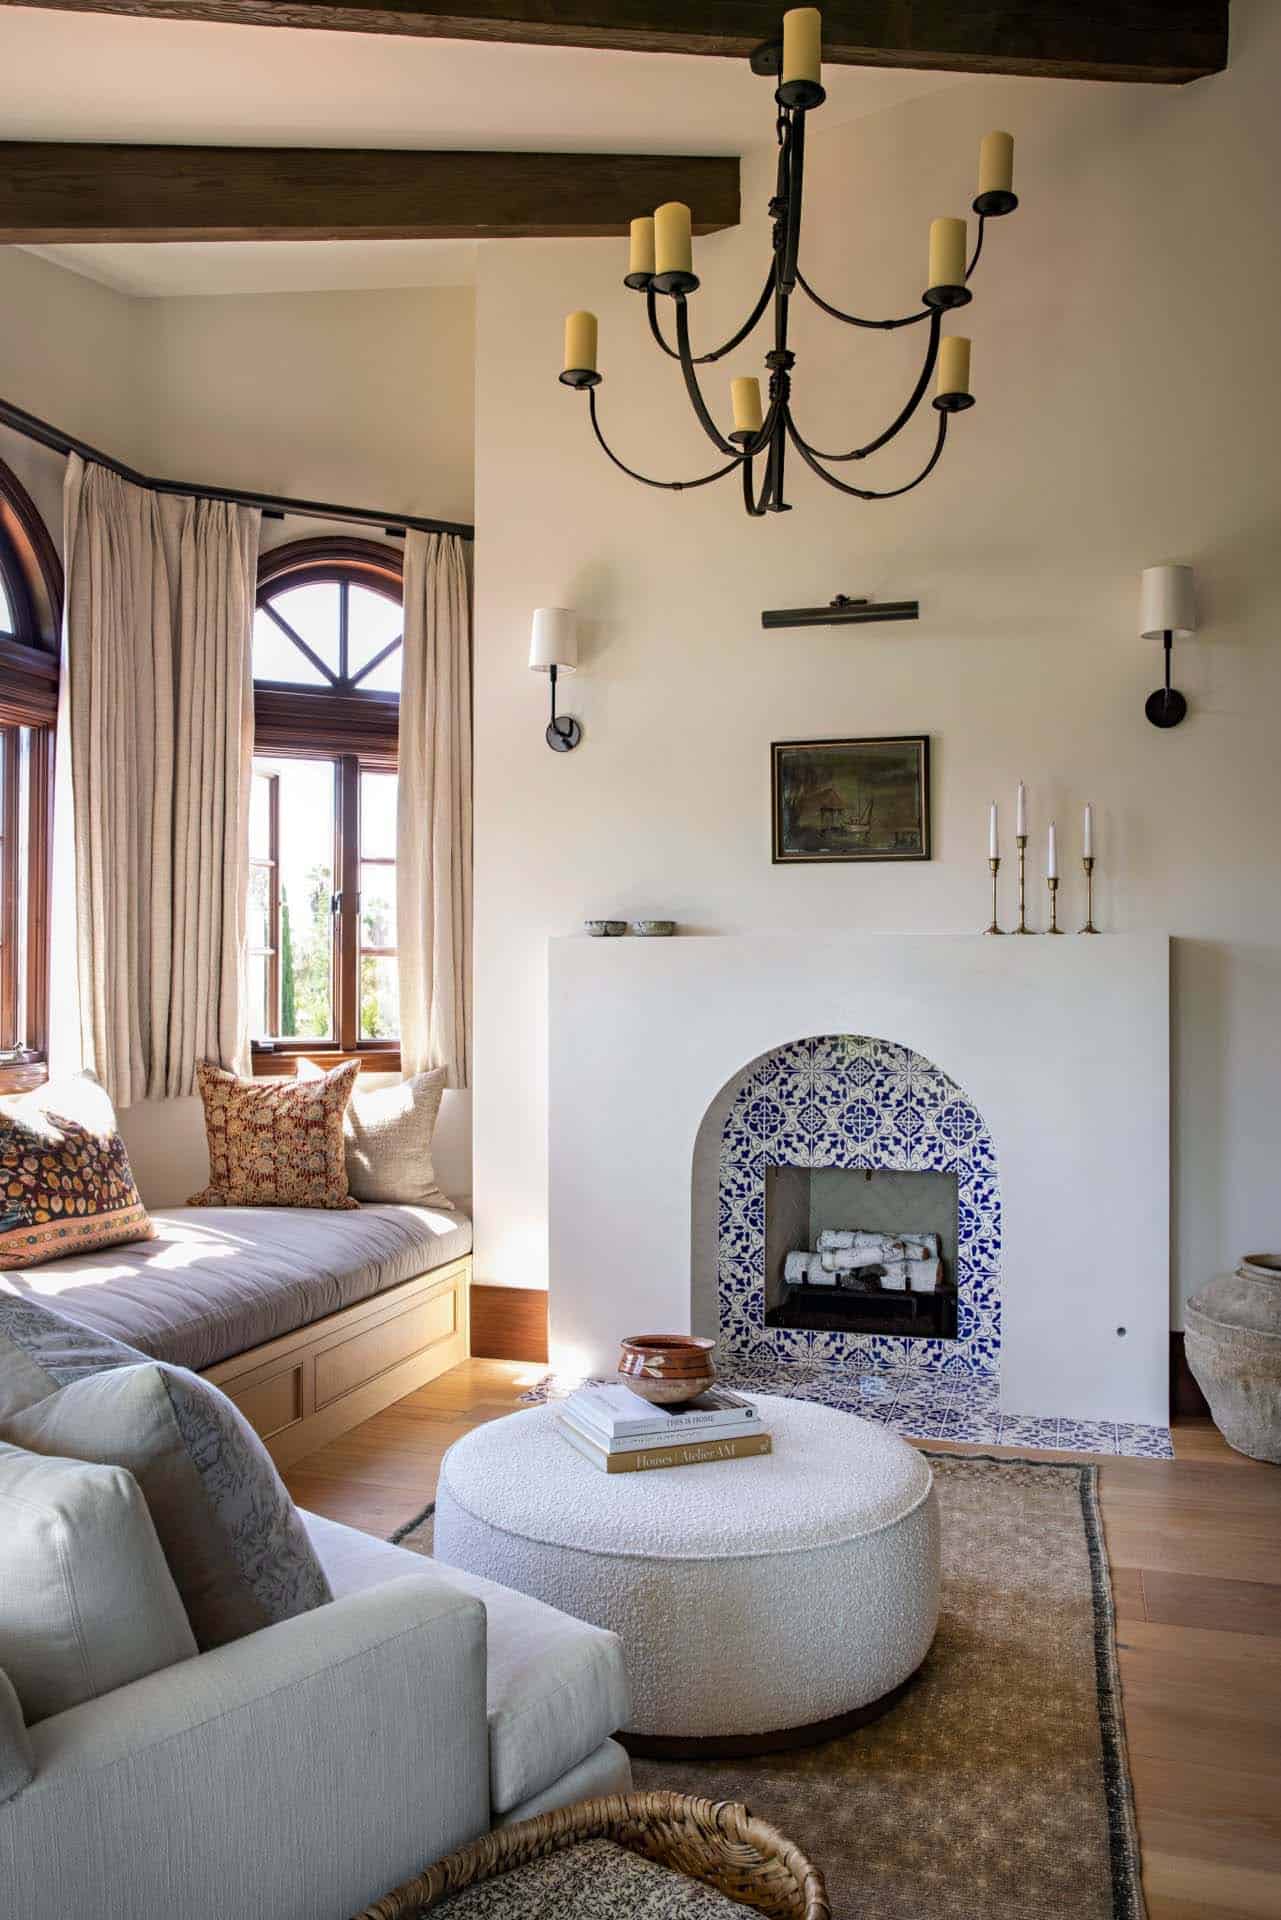 mediterranean-style-bedroom-sitting-room-with-a-fireplace